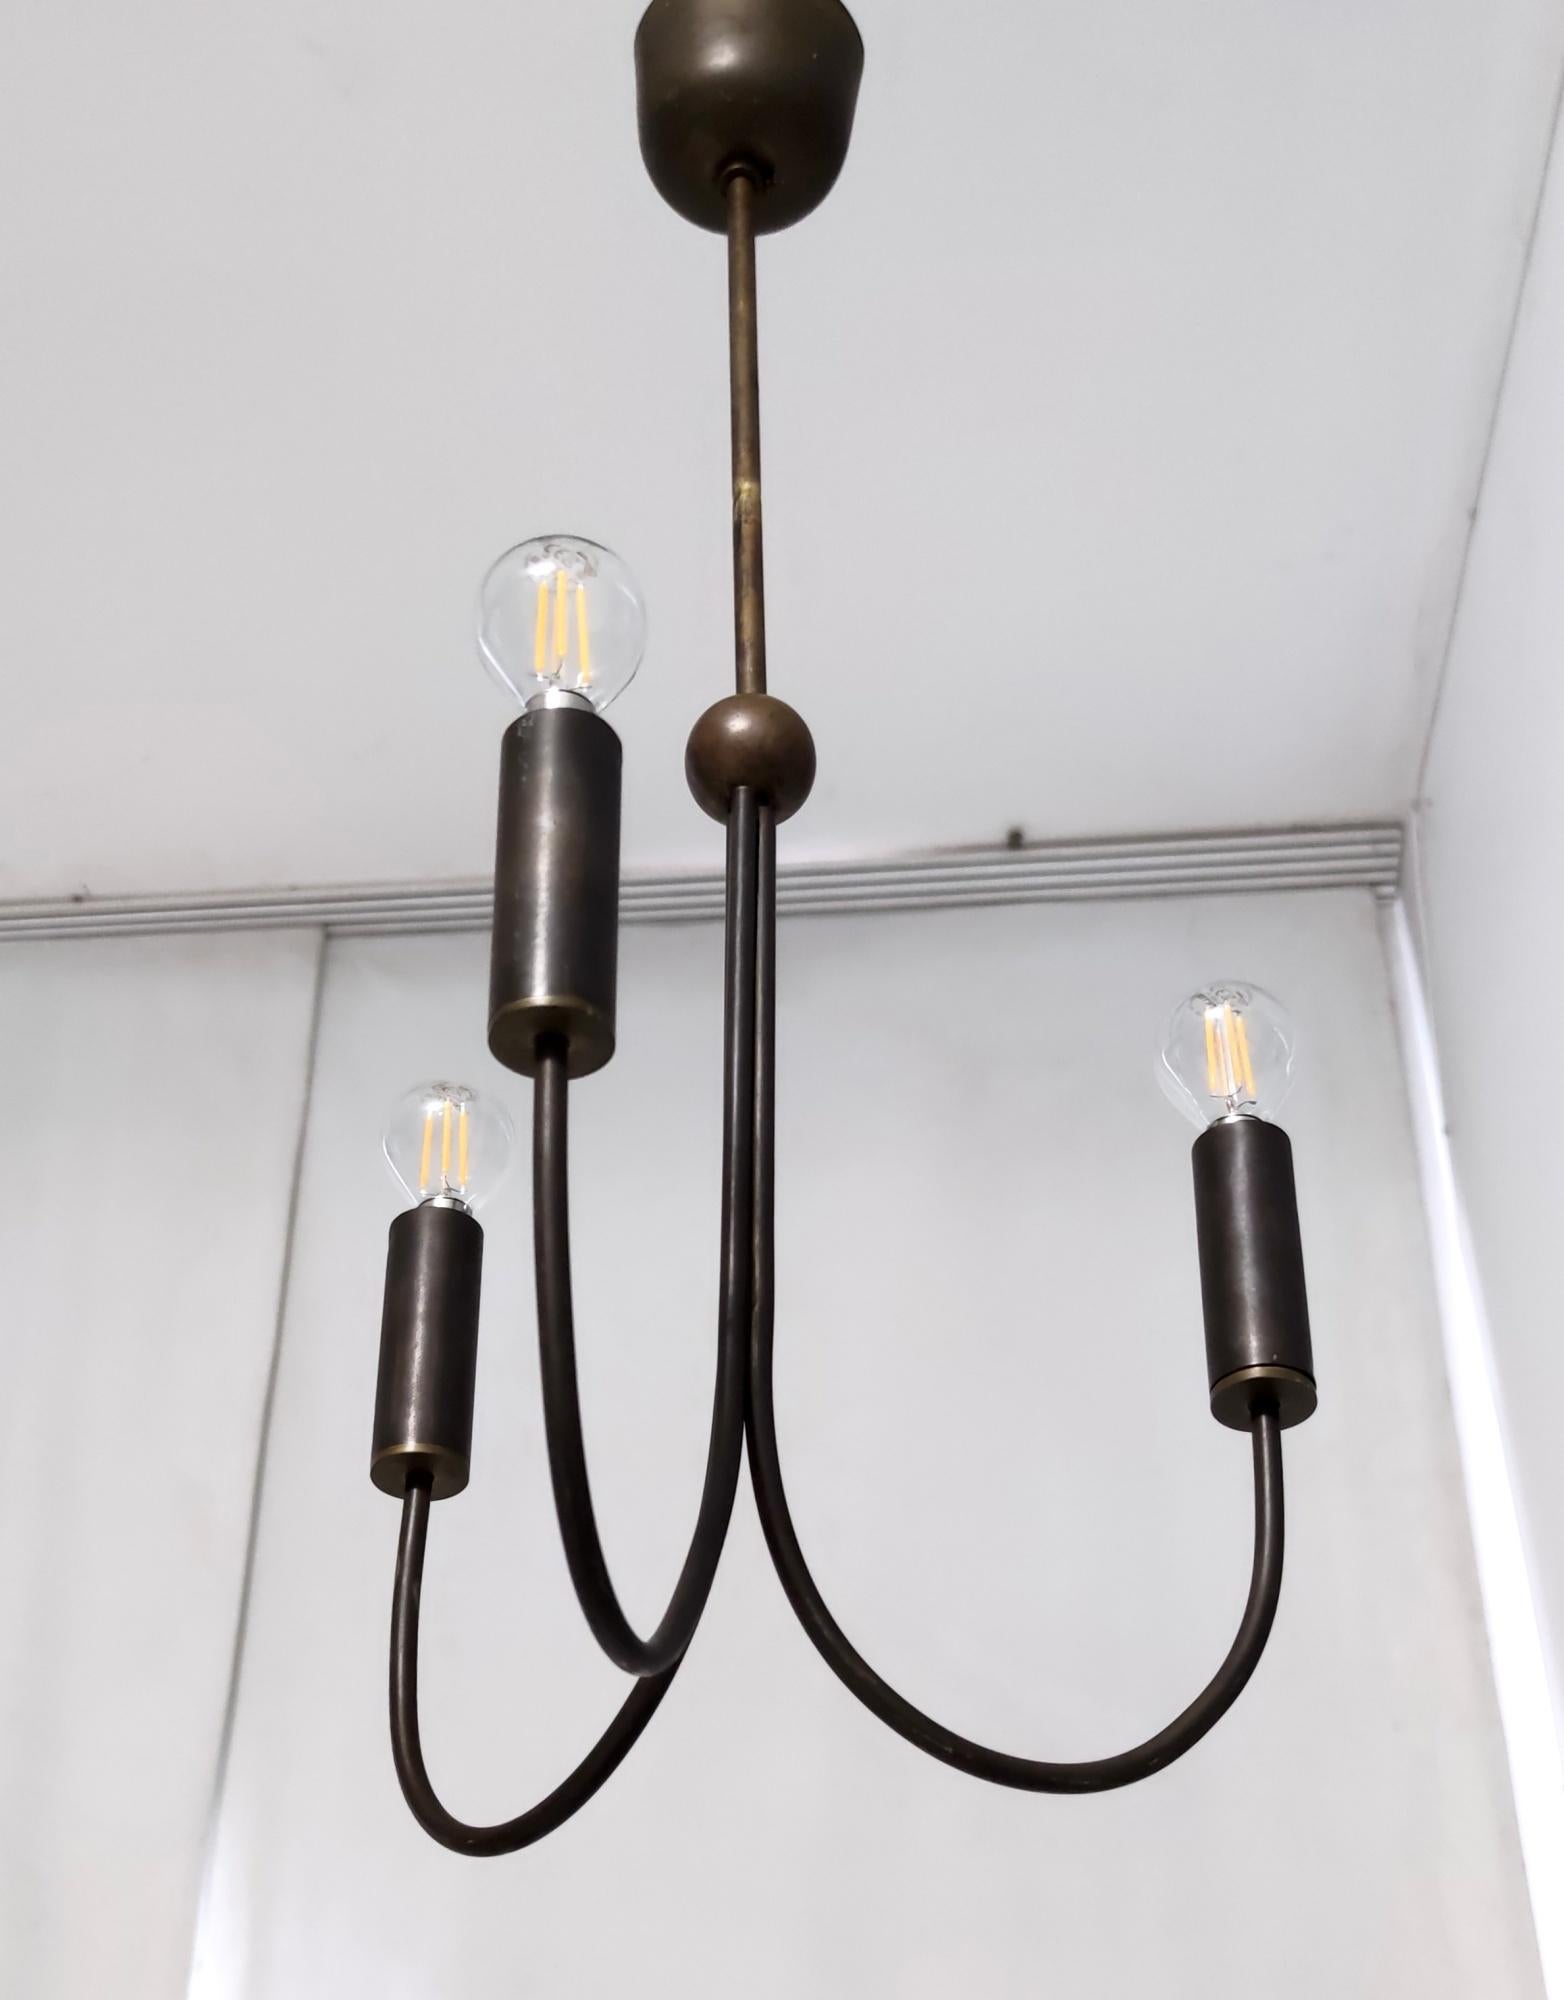 Mid-20th Century Vintage Three-Light Burnished Brass Chandelier Ascribable to Guglielmo Ulrich